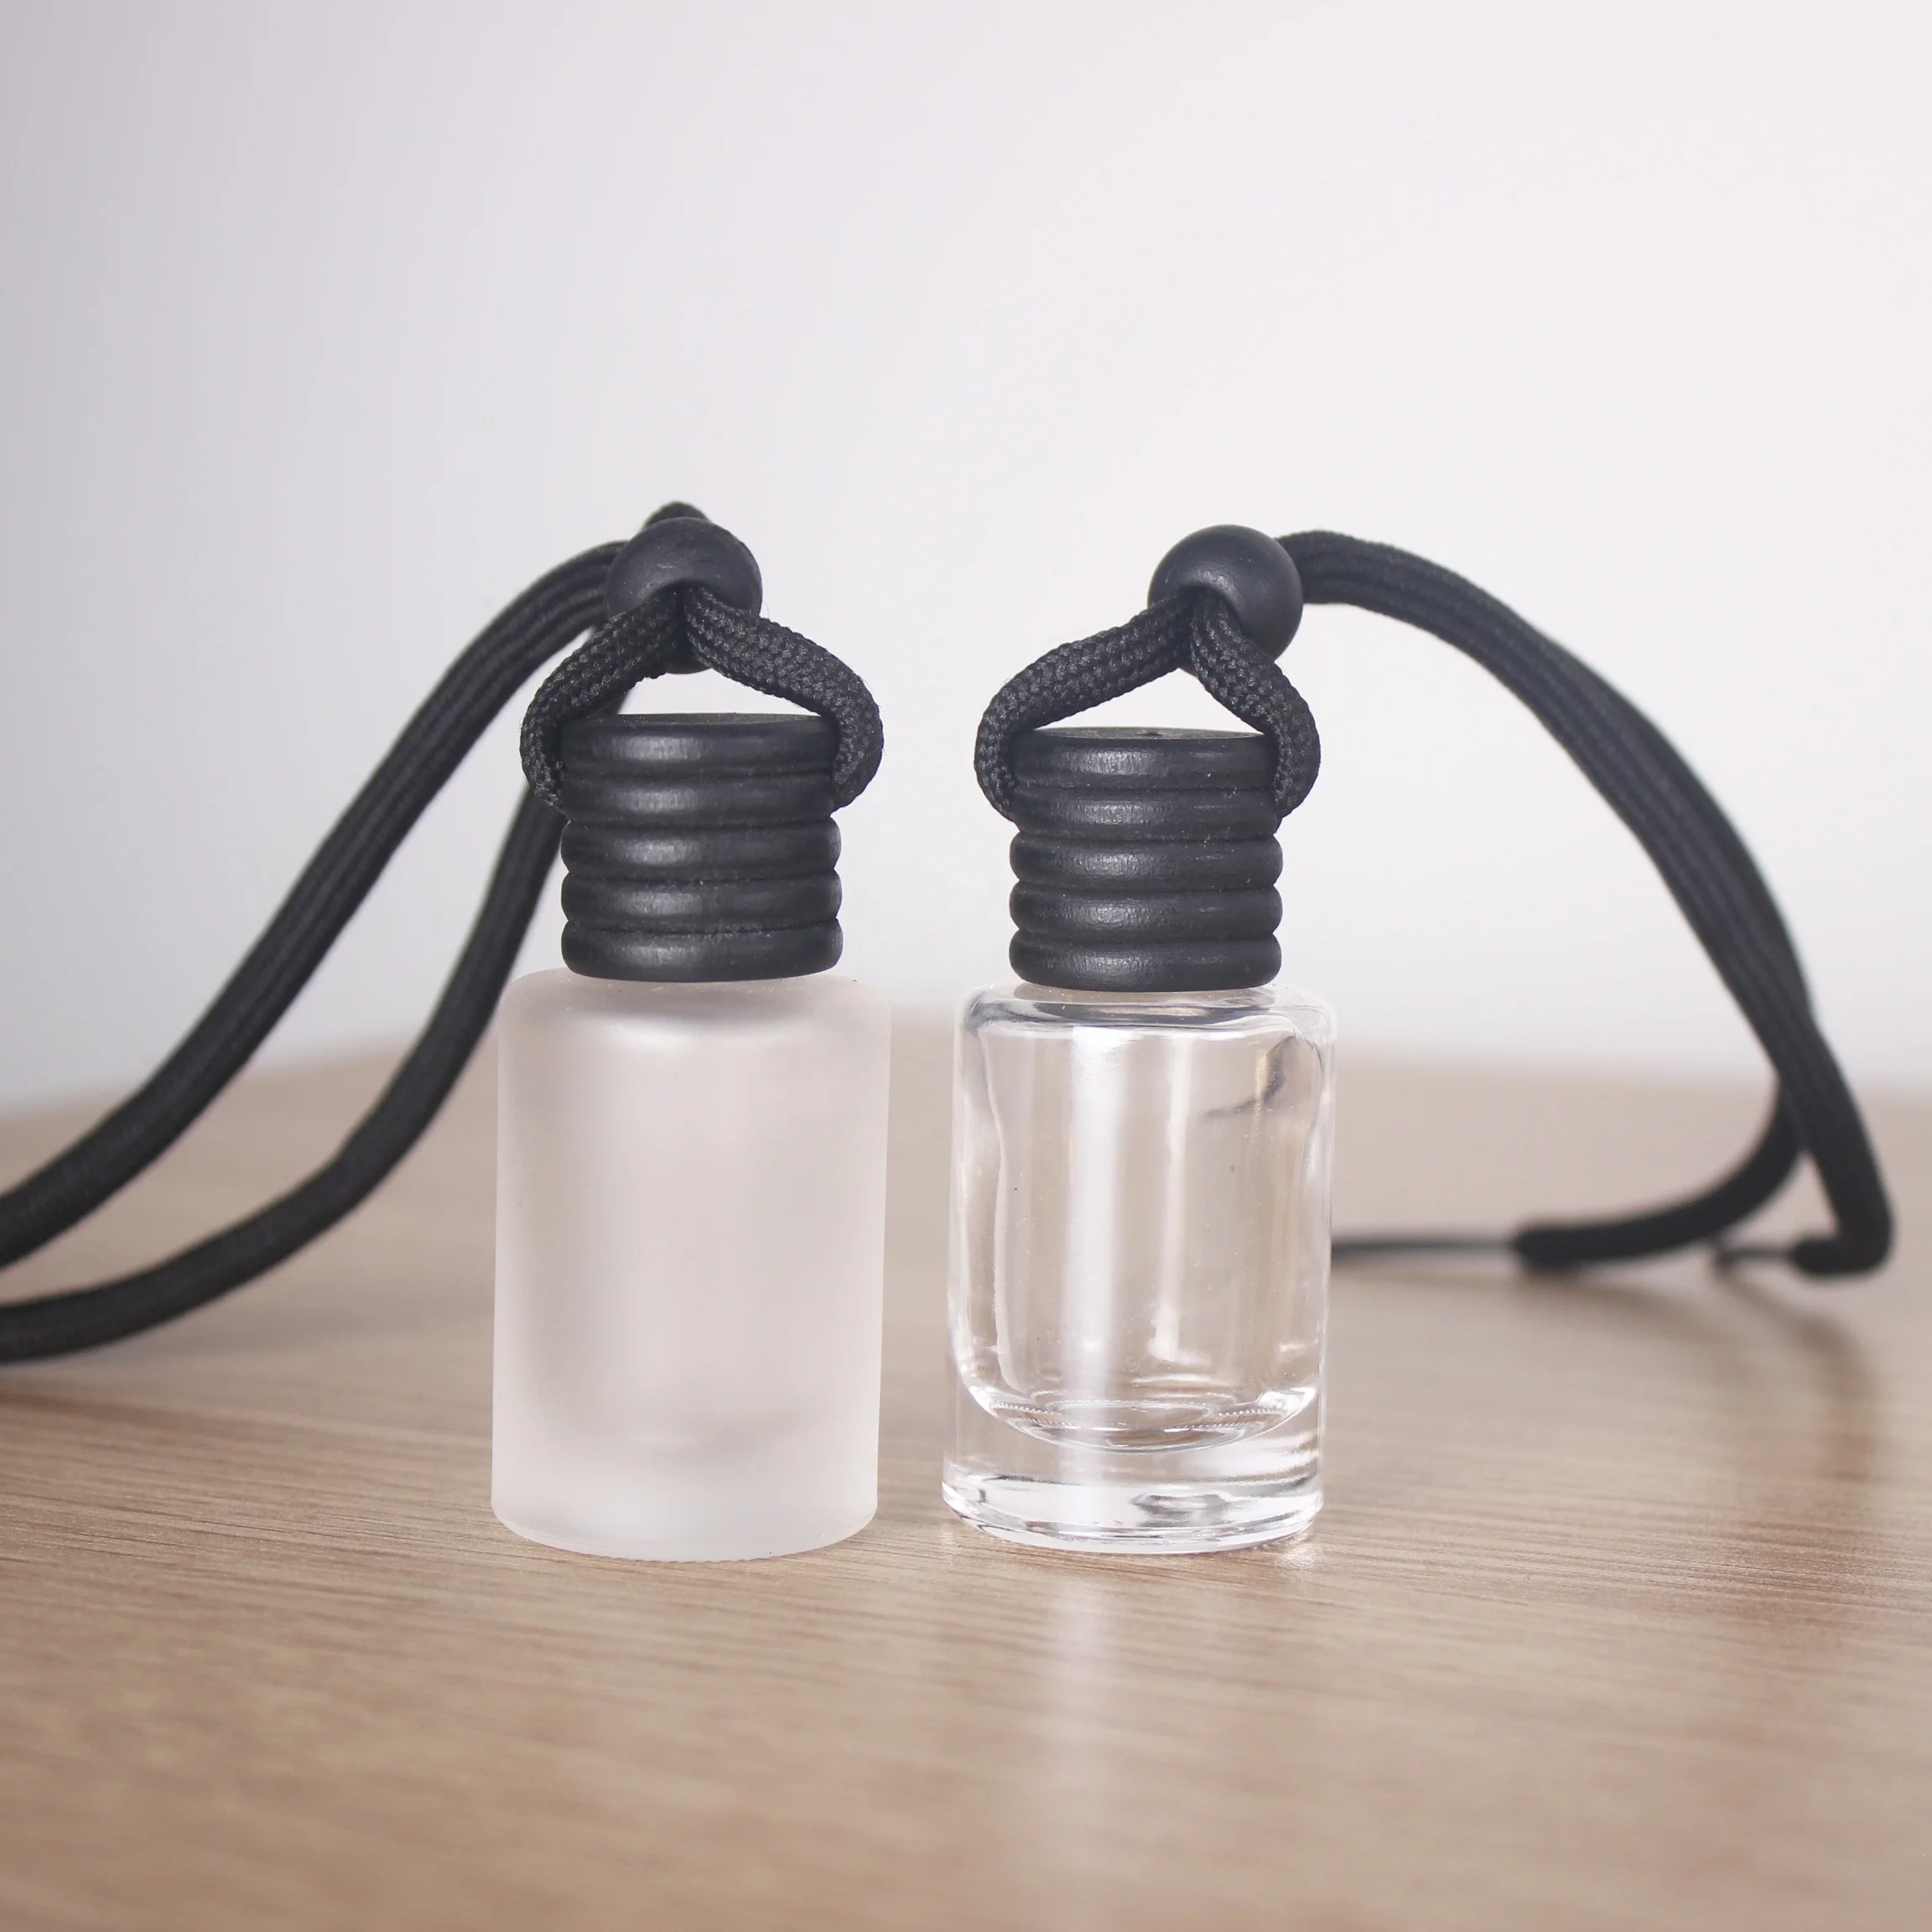 

8ml 10ml 12ml Multi style glass perfume empty bottle air freshener diffuser empty frosted car perfume bottles with black ropes